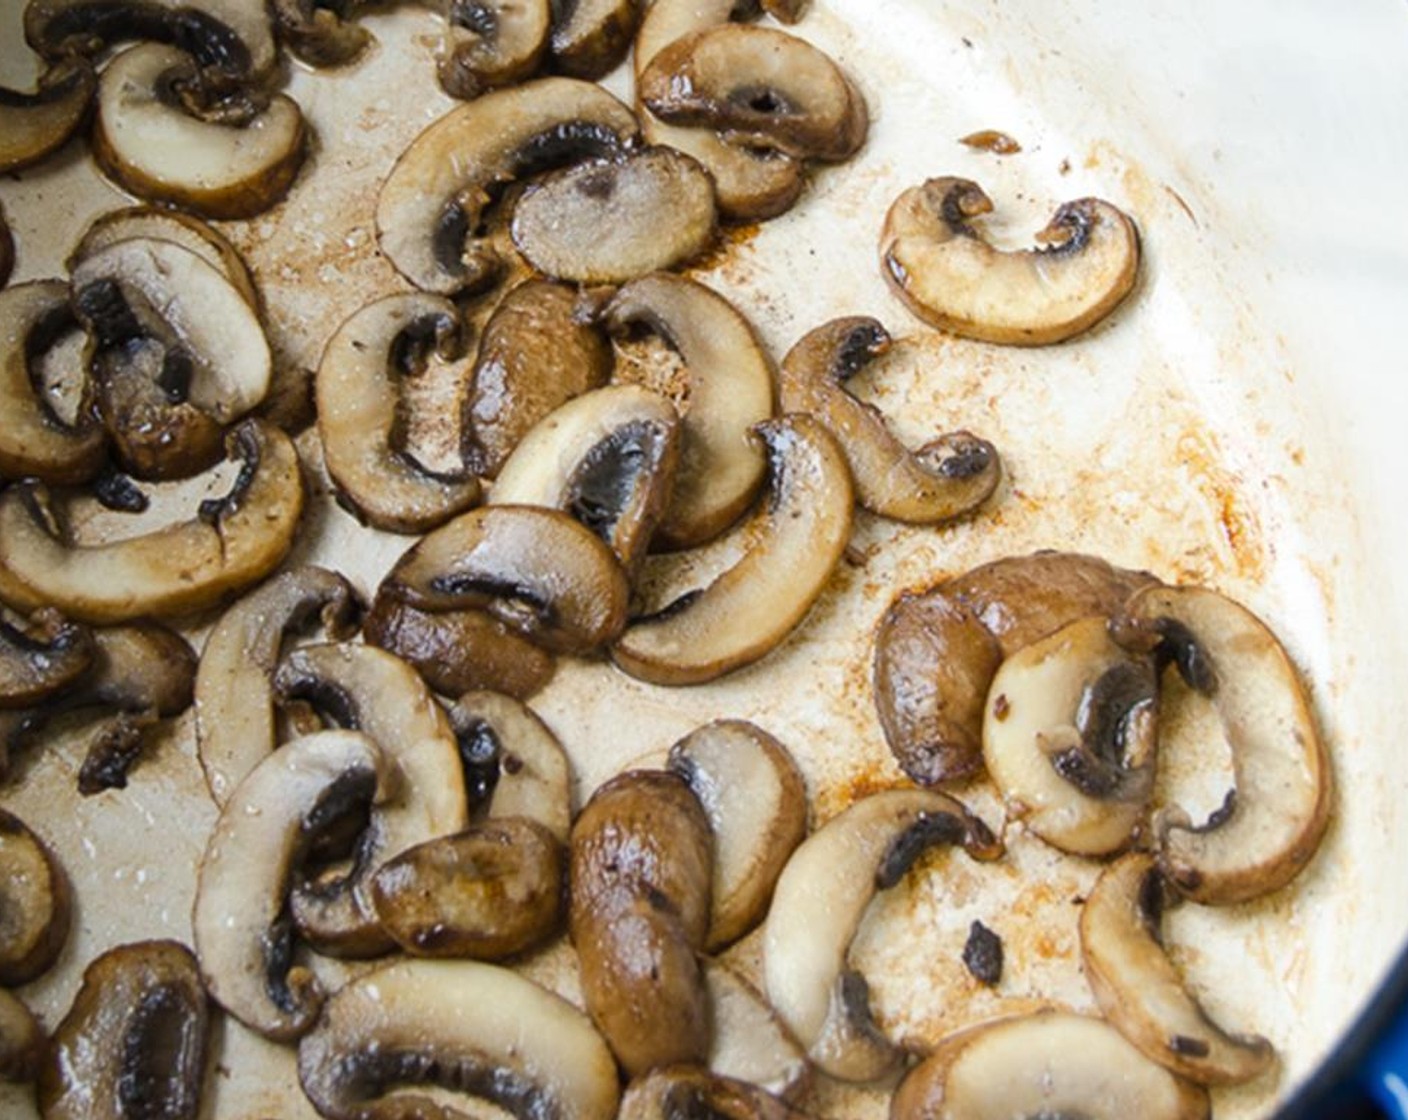 step 7 If the pot still contains particulate, clean the pot and return it to the stovetop over medium high heat. When the pot has heated up, add Butter (1 Tbsp) when it foams add the Cremini Mushrooms (2 1/4 cups) and cook in a single layer until browned about 3 to 4 minutes.